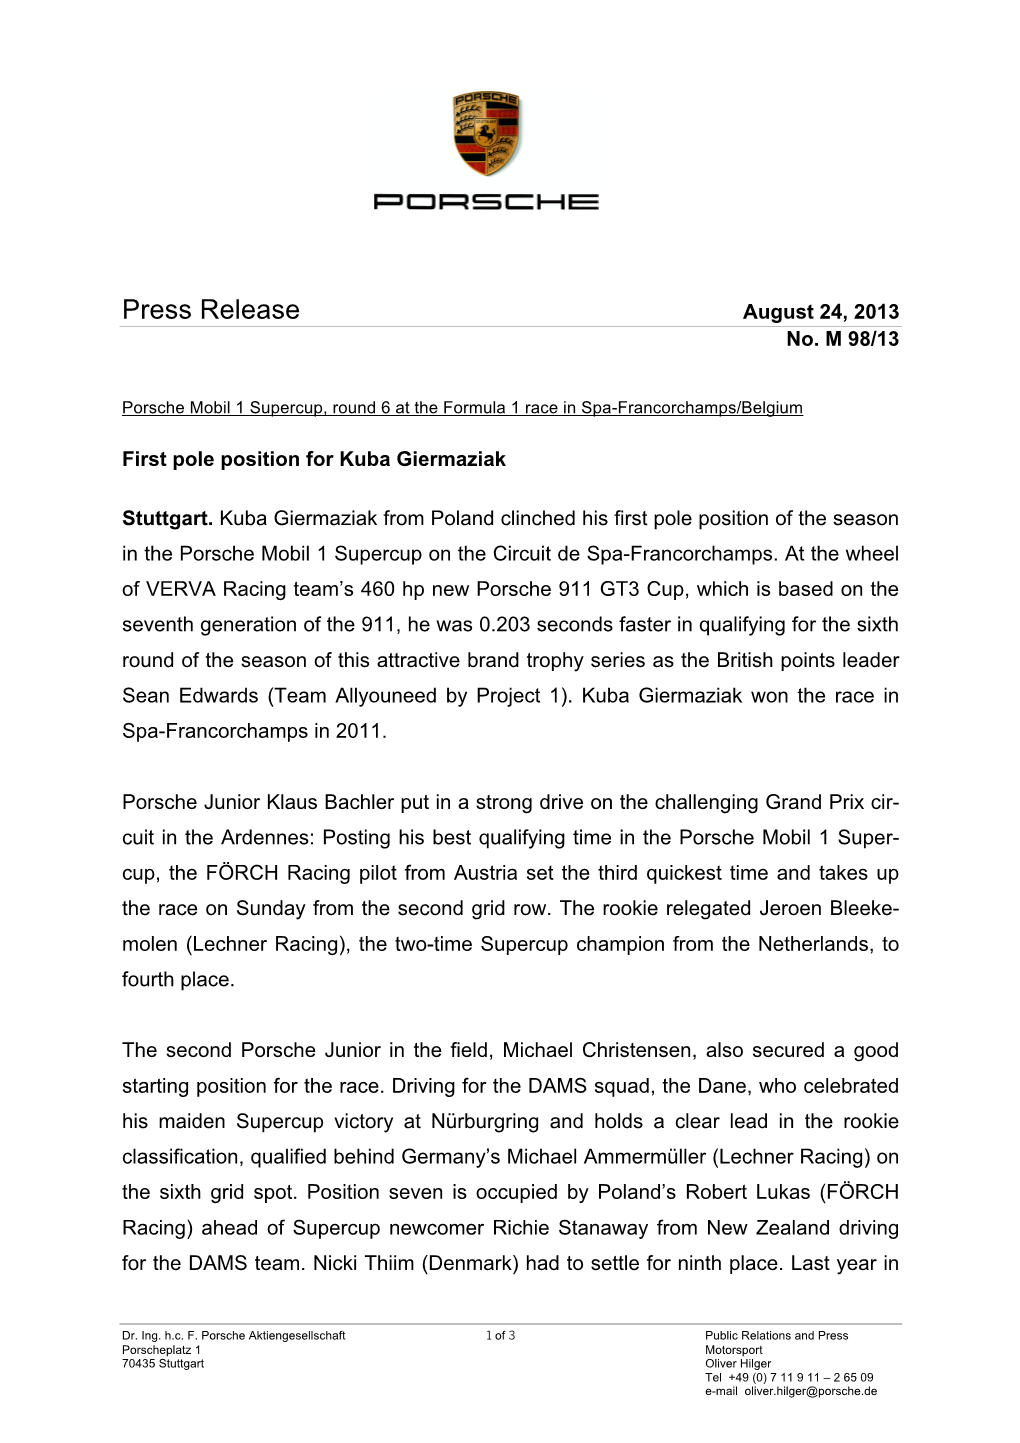 Press Release August 24, 2013 No